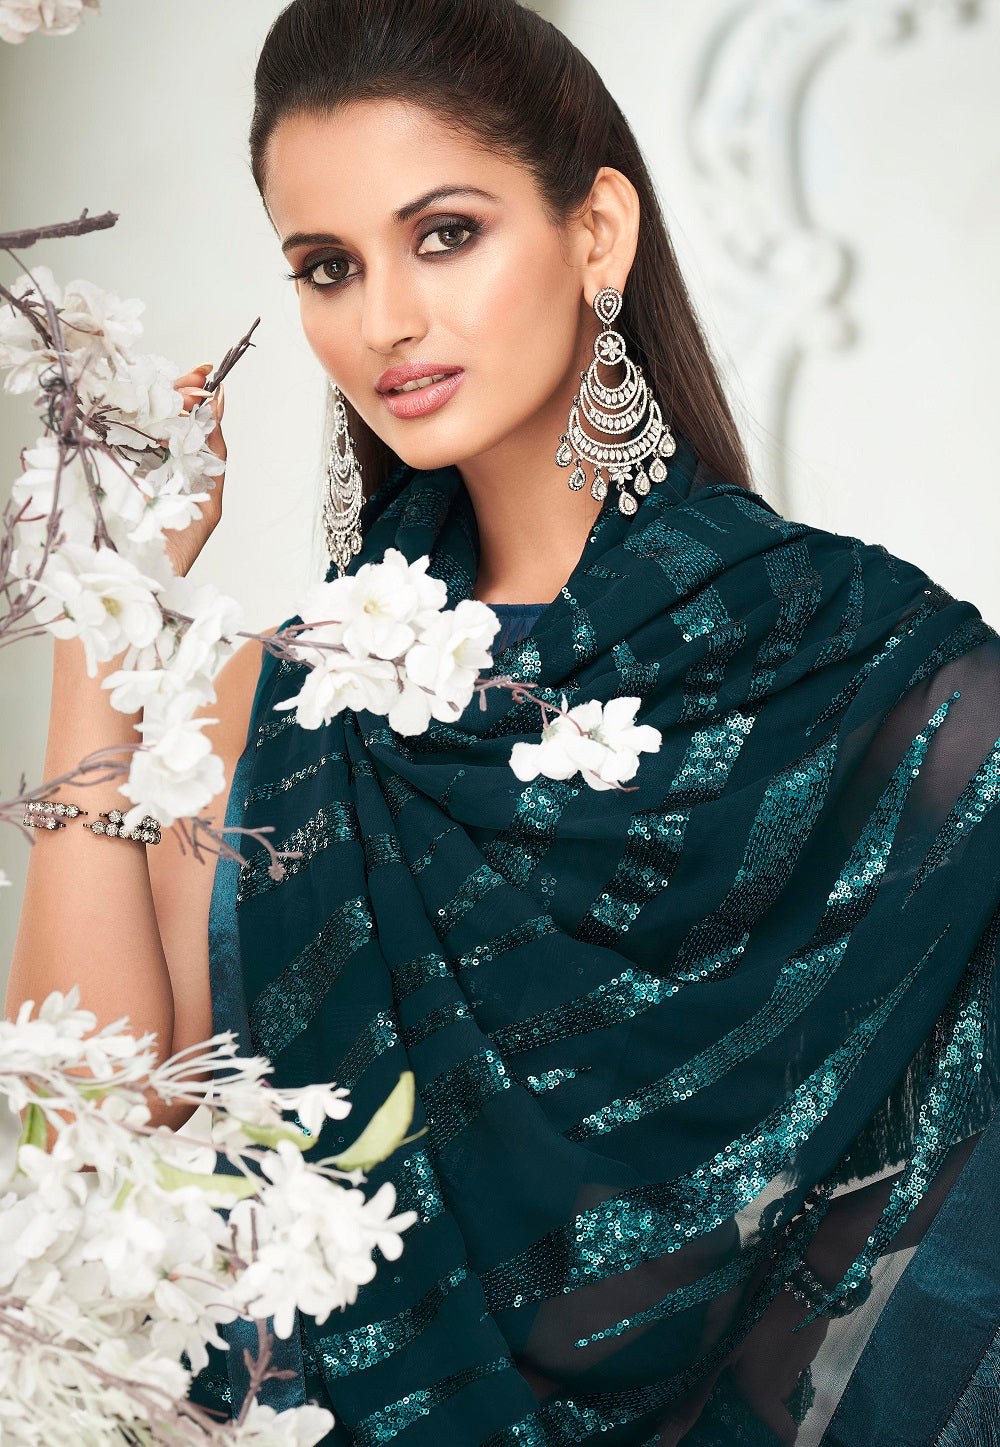 Georgette Sequinned Saree in Teal Green